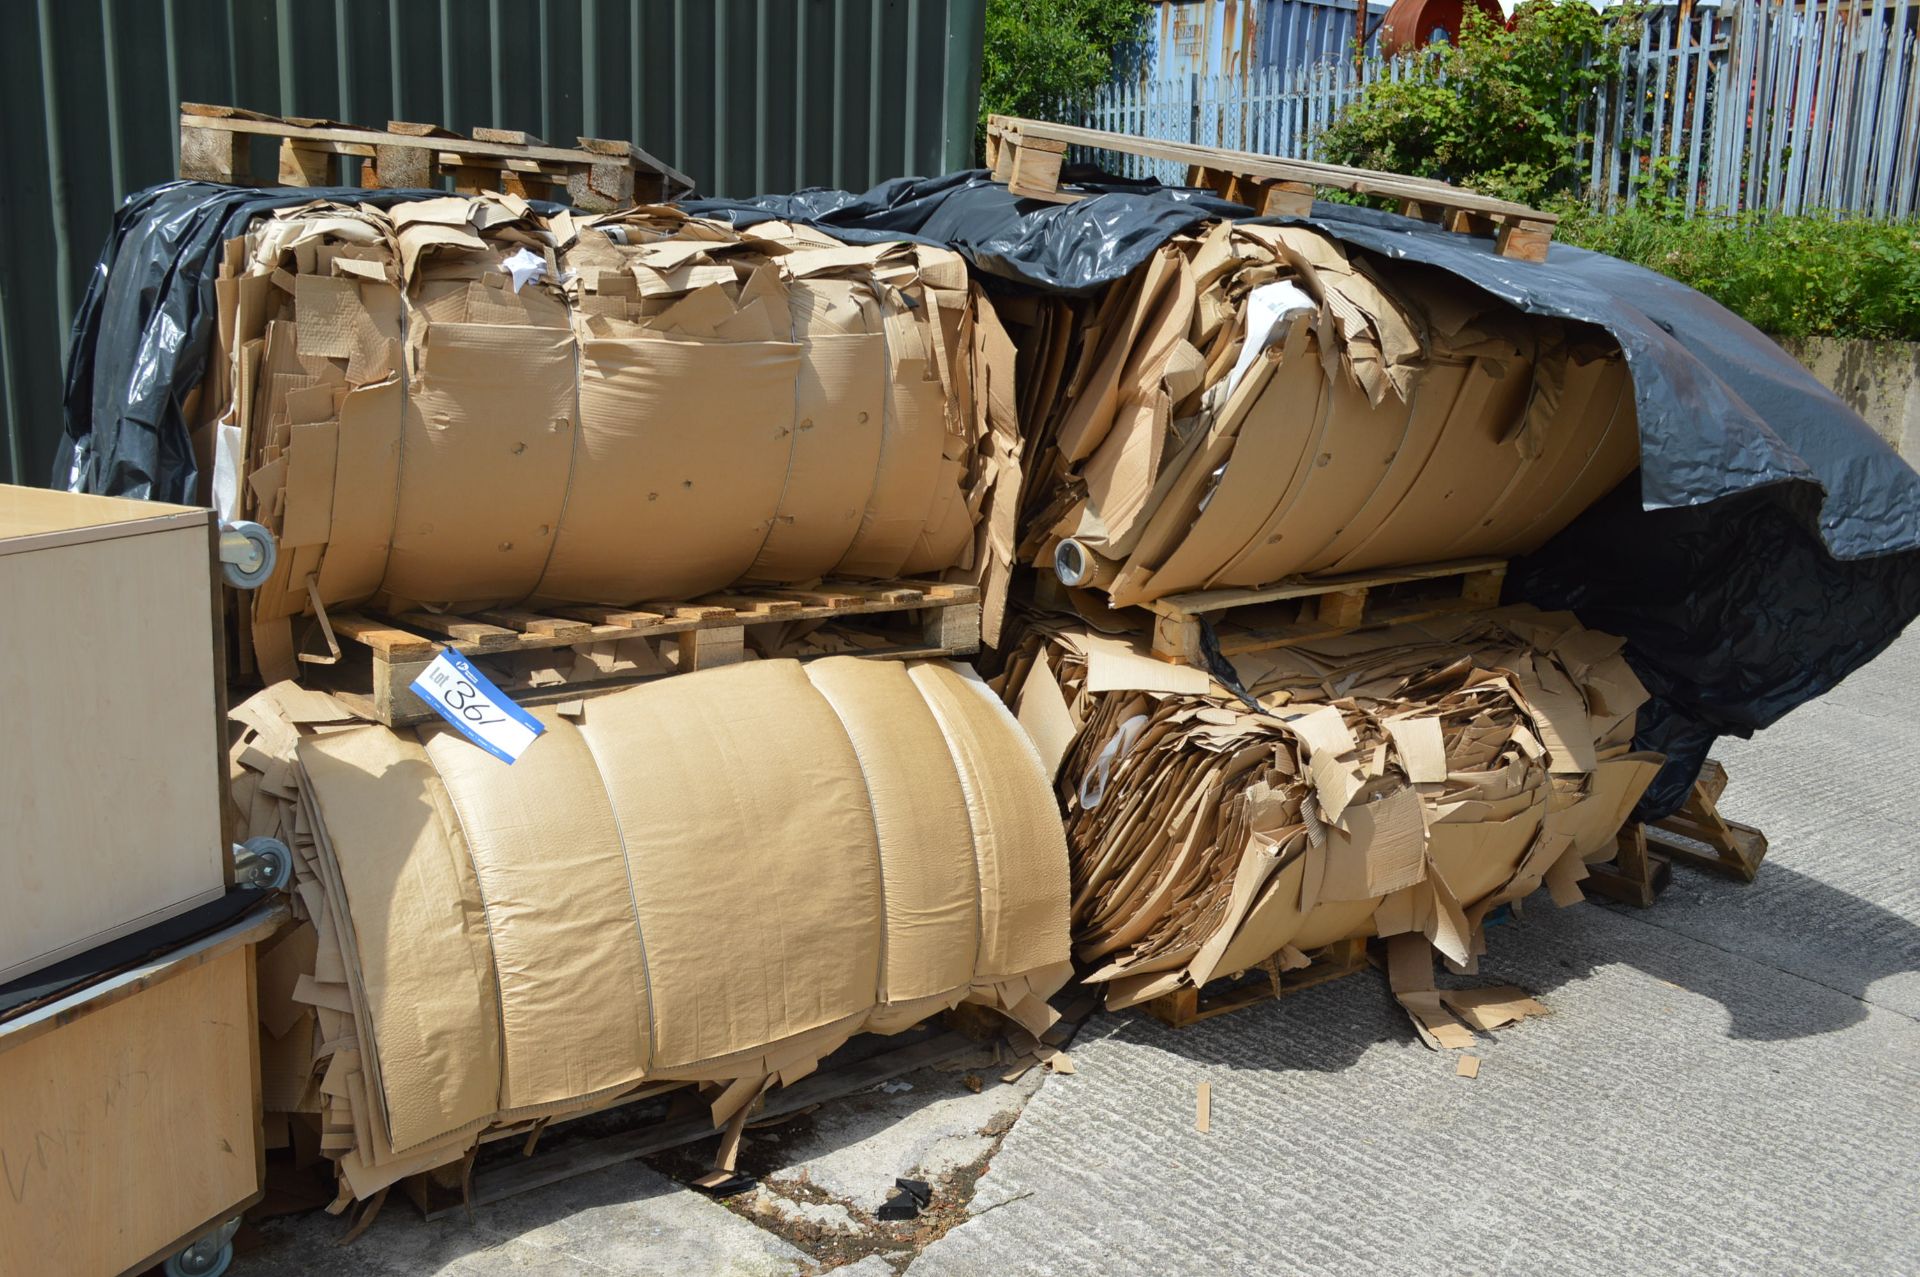 Baled Corrugated Cardboard, as set out in one area